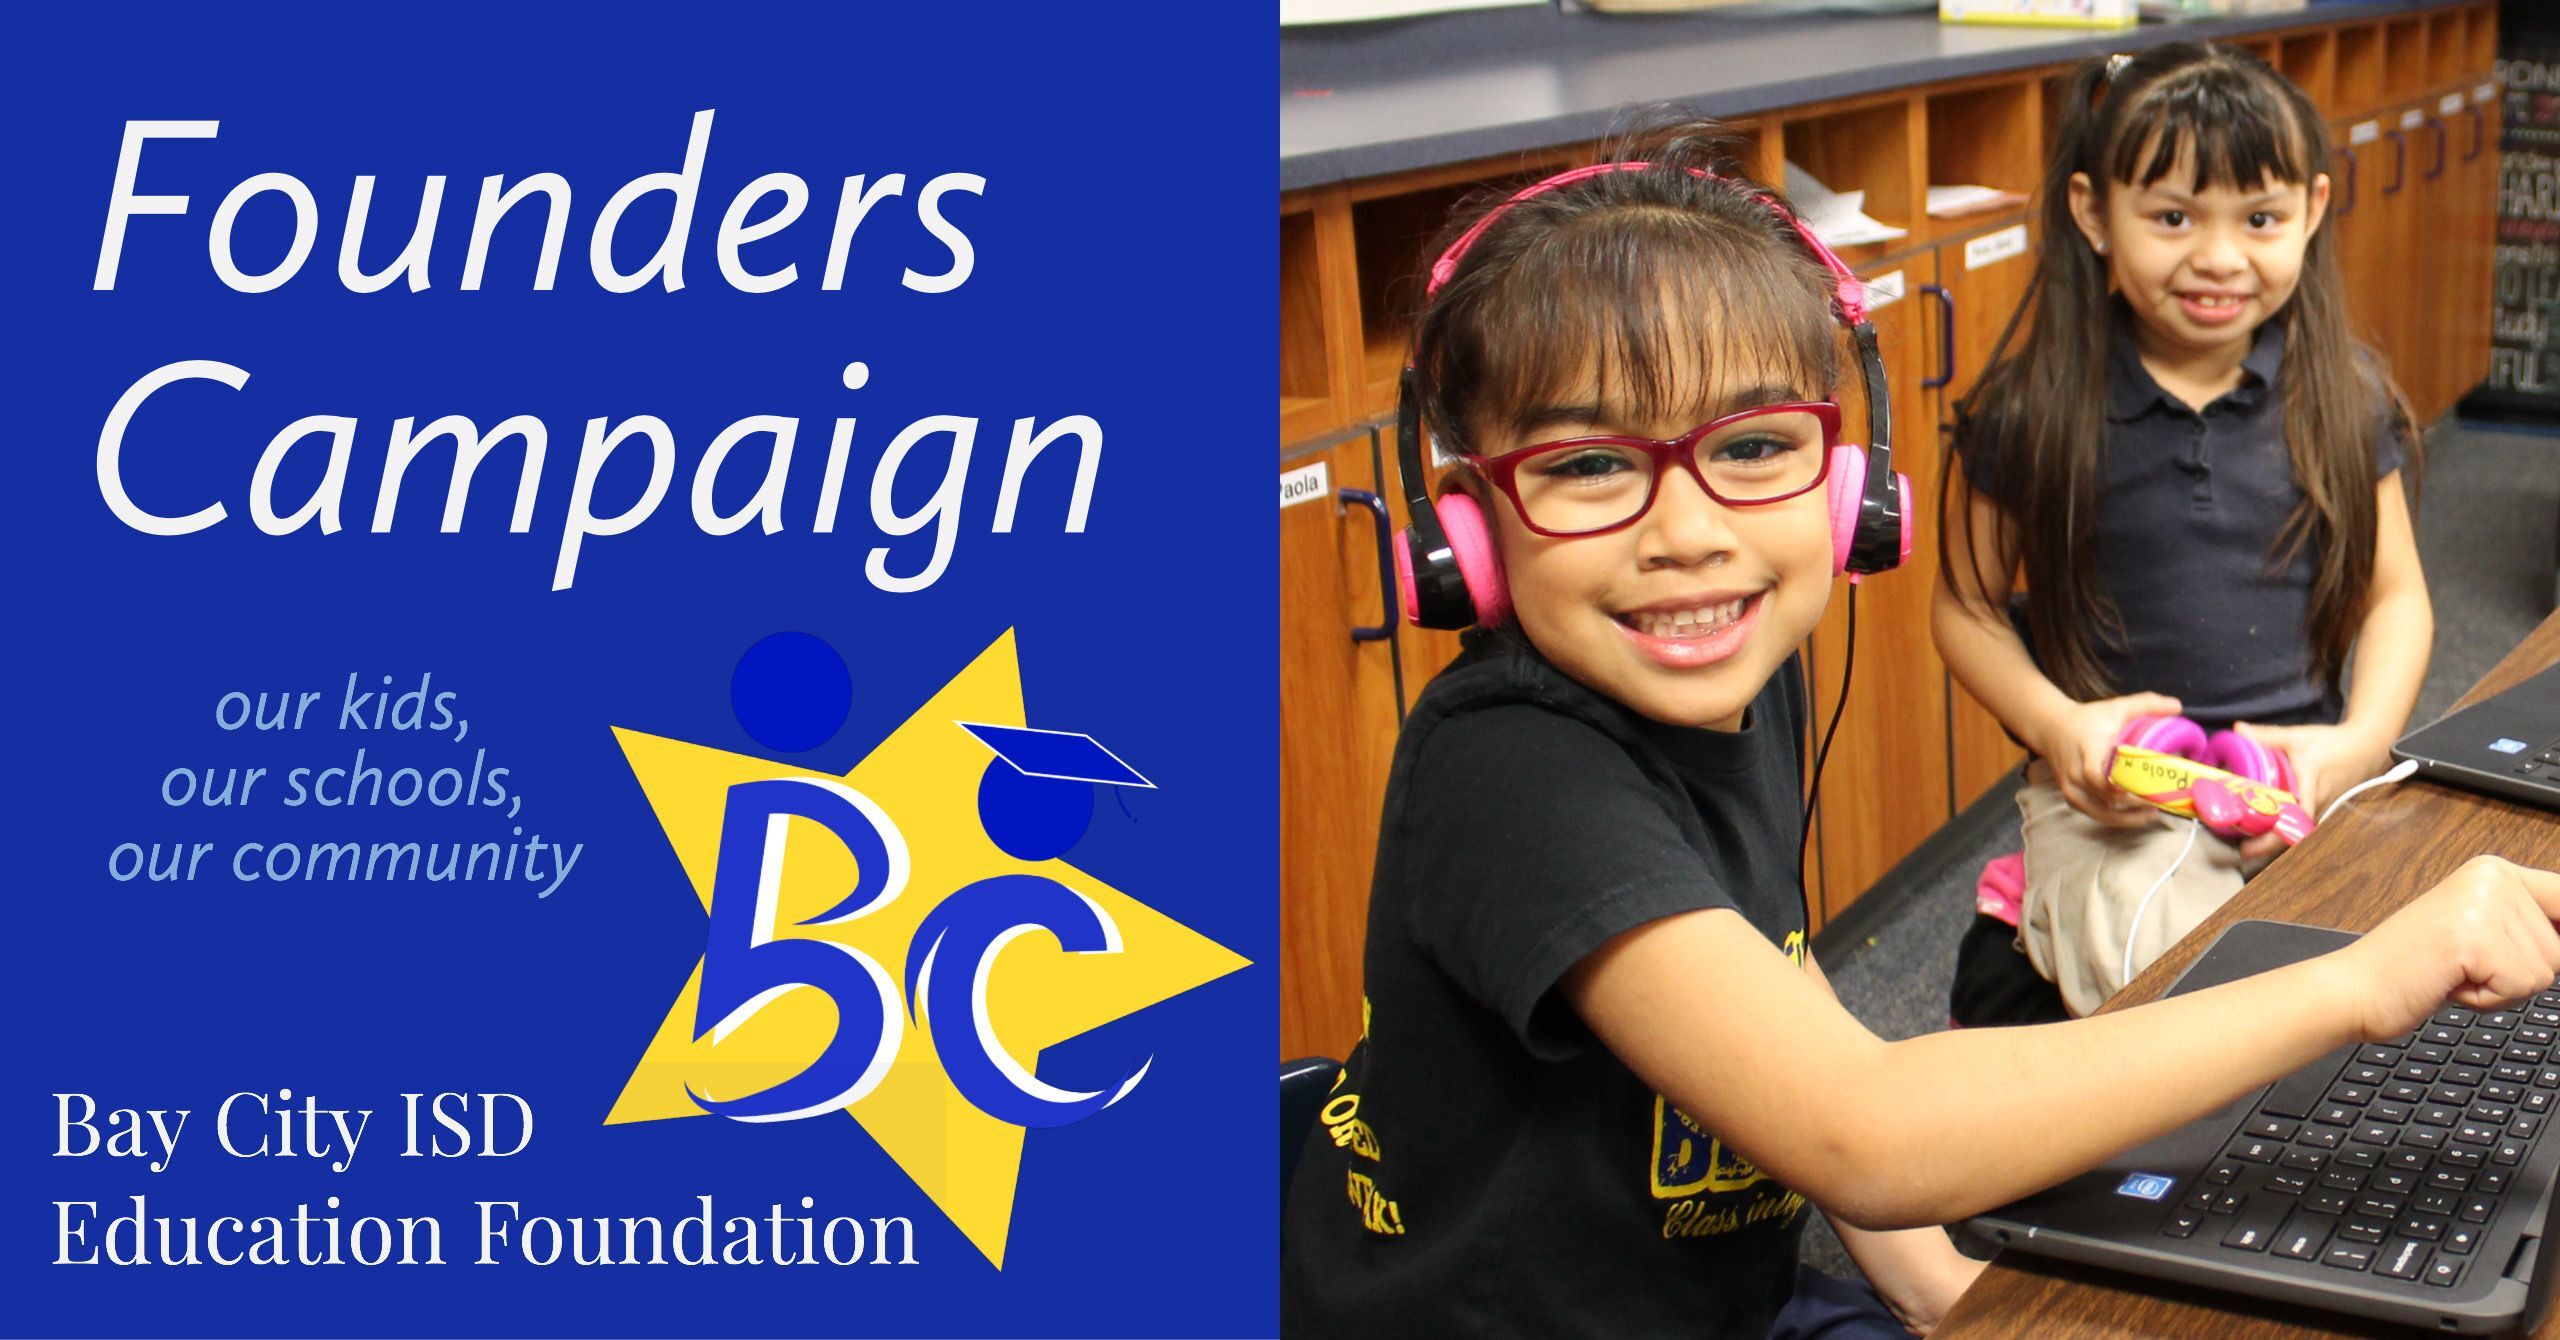 BCISD Education Foundation Will Support Students and Teachers